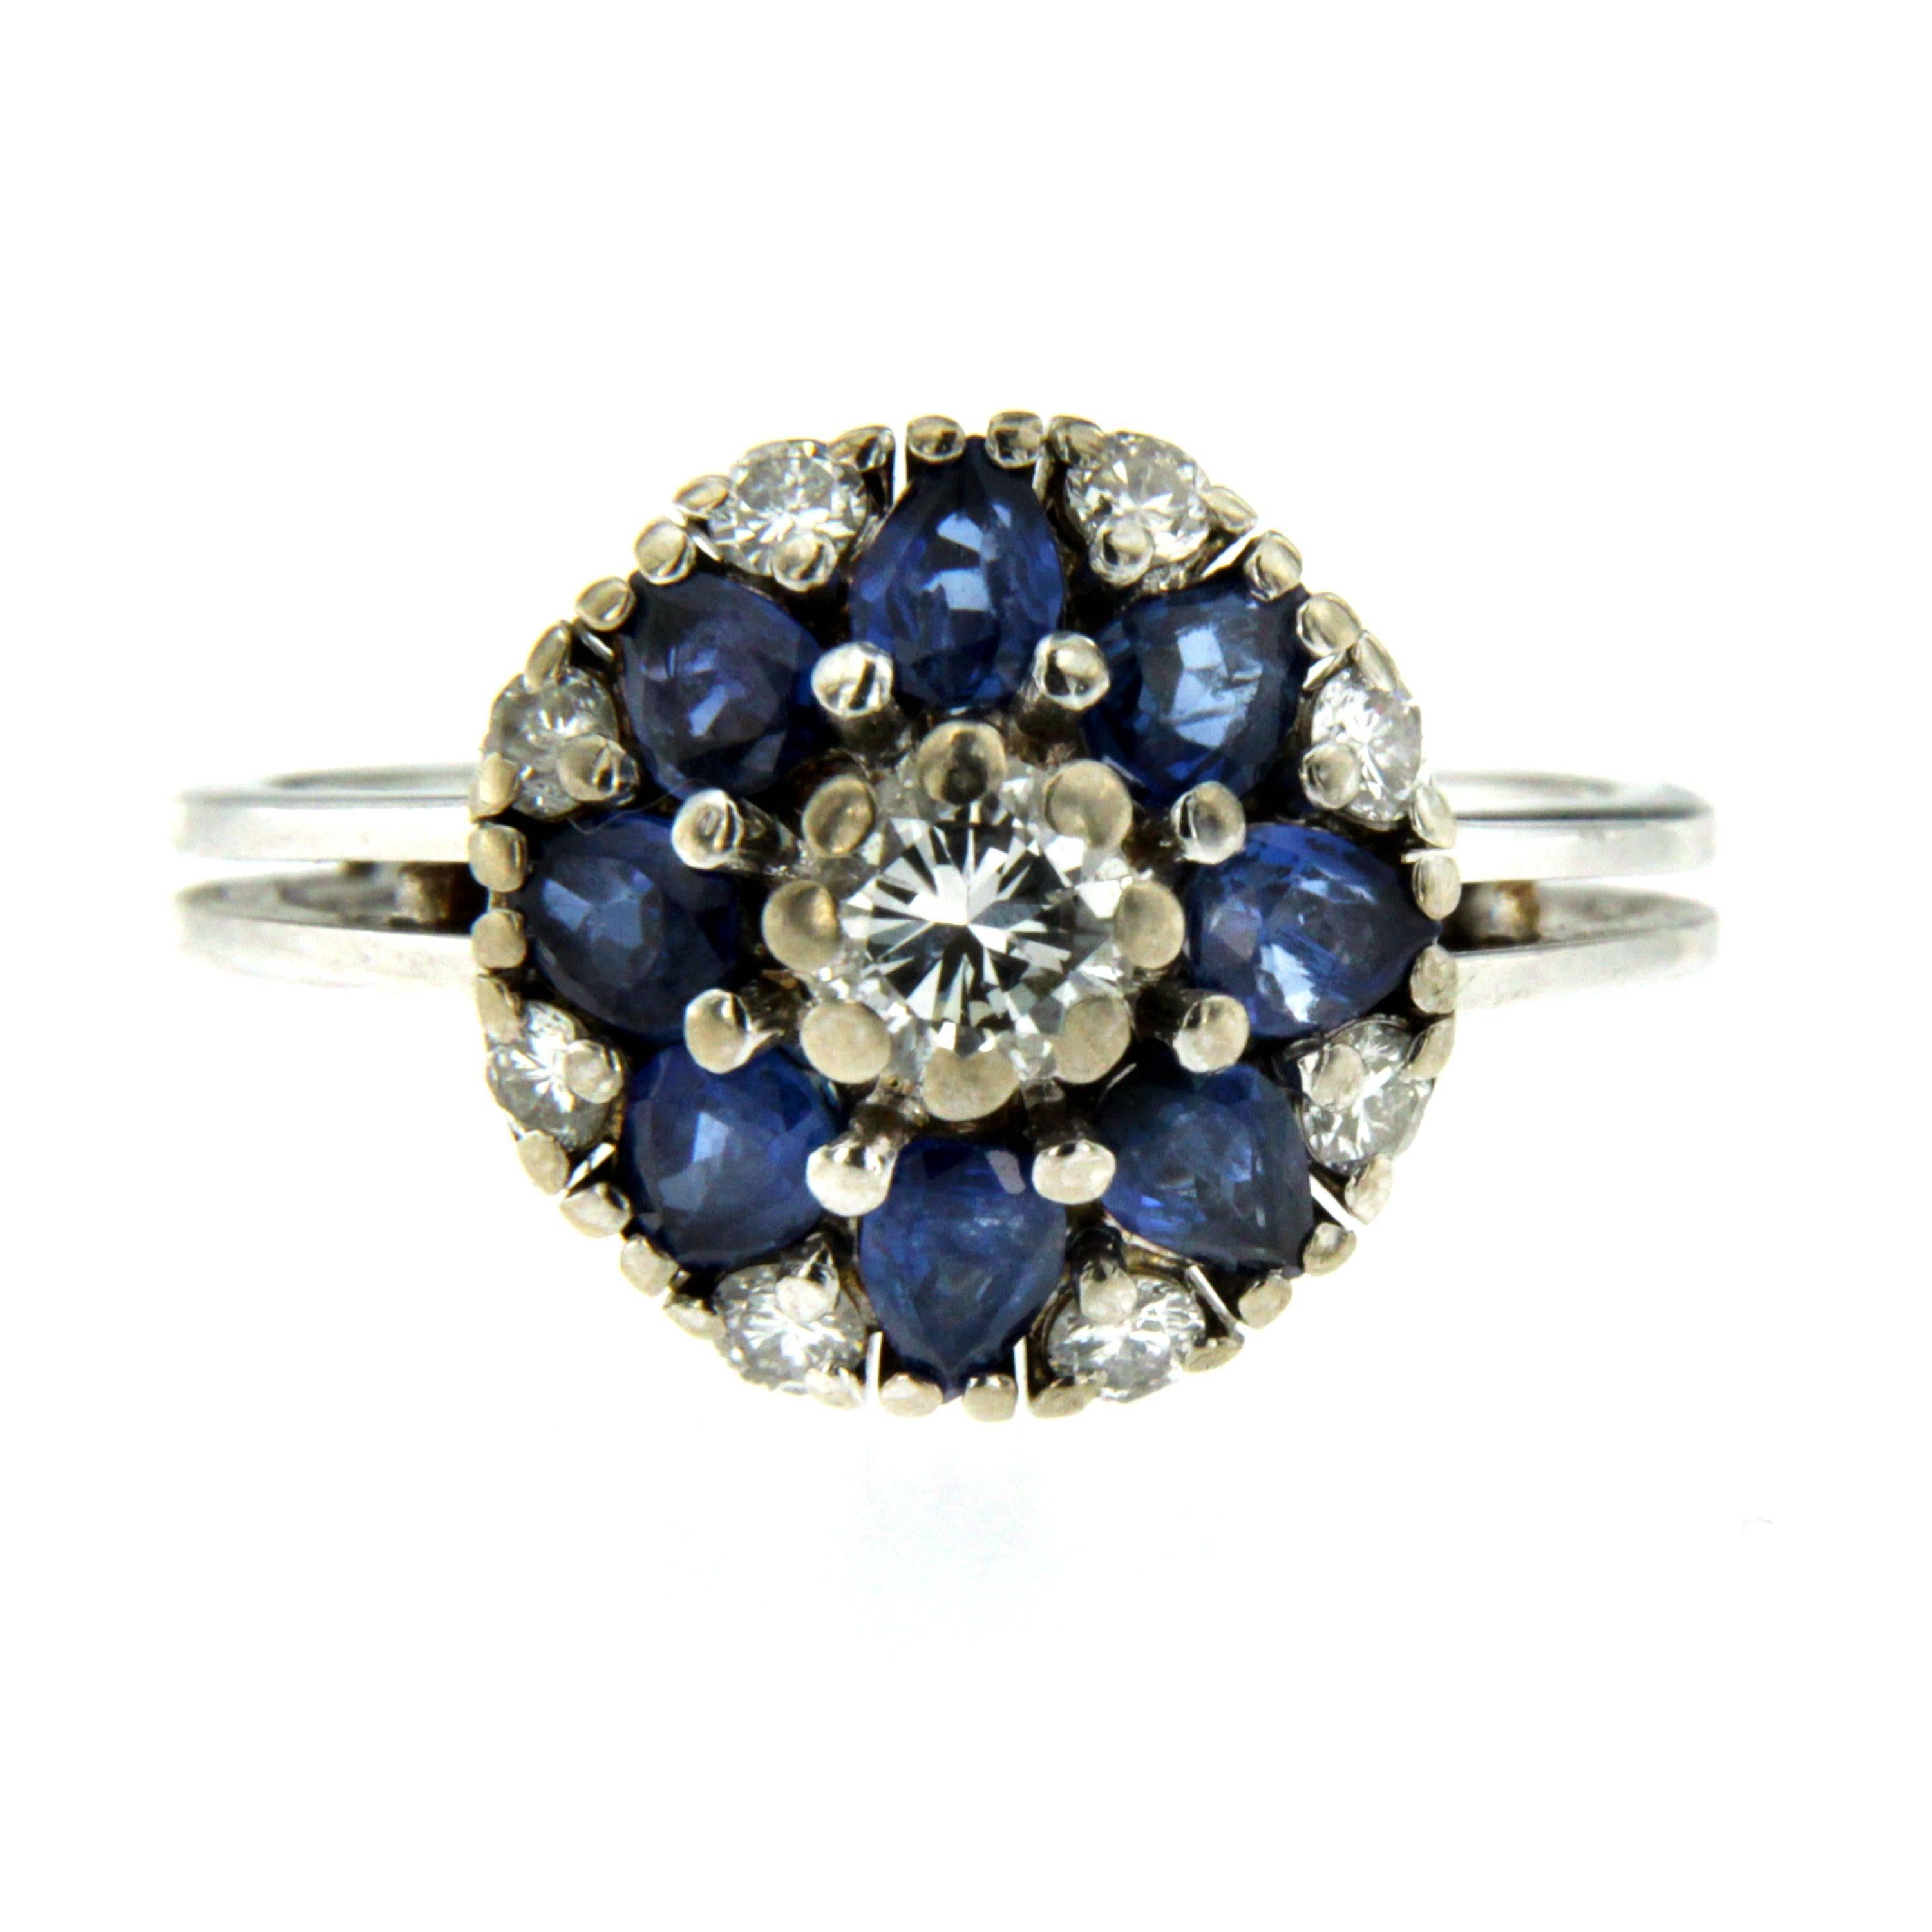 A gorgeous 18k Gold Sapphire Diamond Ring featuring a 0.25ct. round cut Diamond, surrounded by 8 oval cut sapphires weighing 3.20ct. and 8 round cut diamonds weighing 0.16 total carats. 
Gross weight: 5.4 Grams 

The ring is in great condition